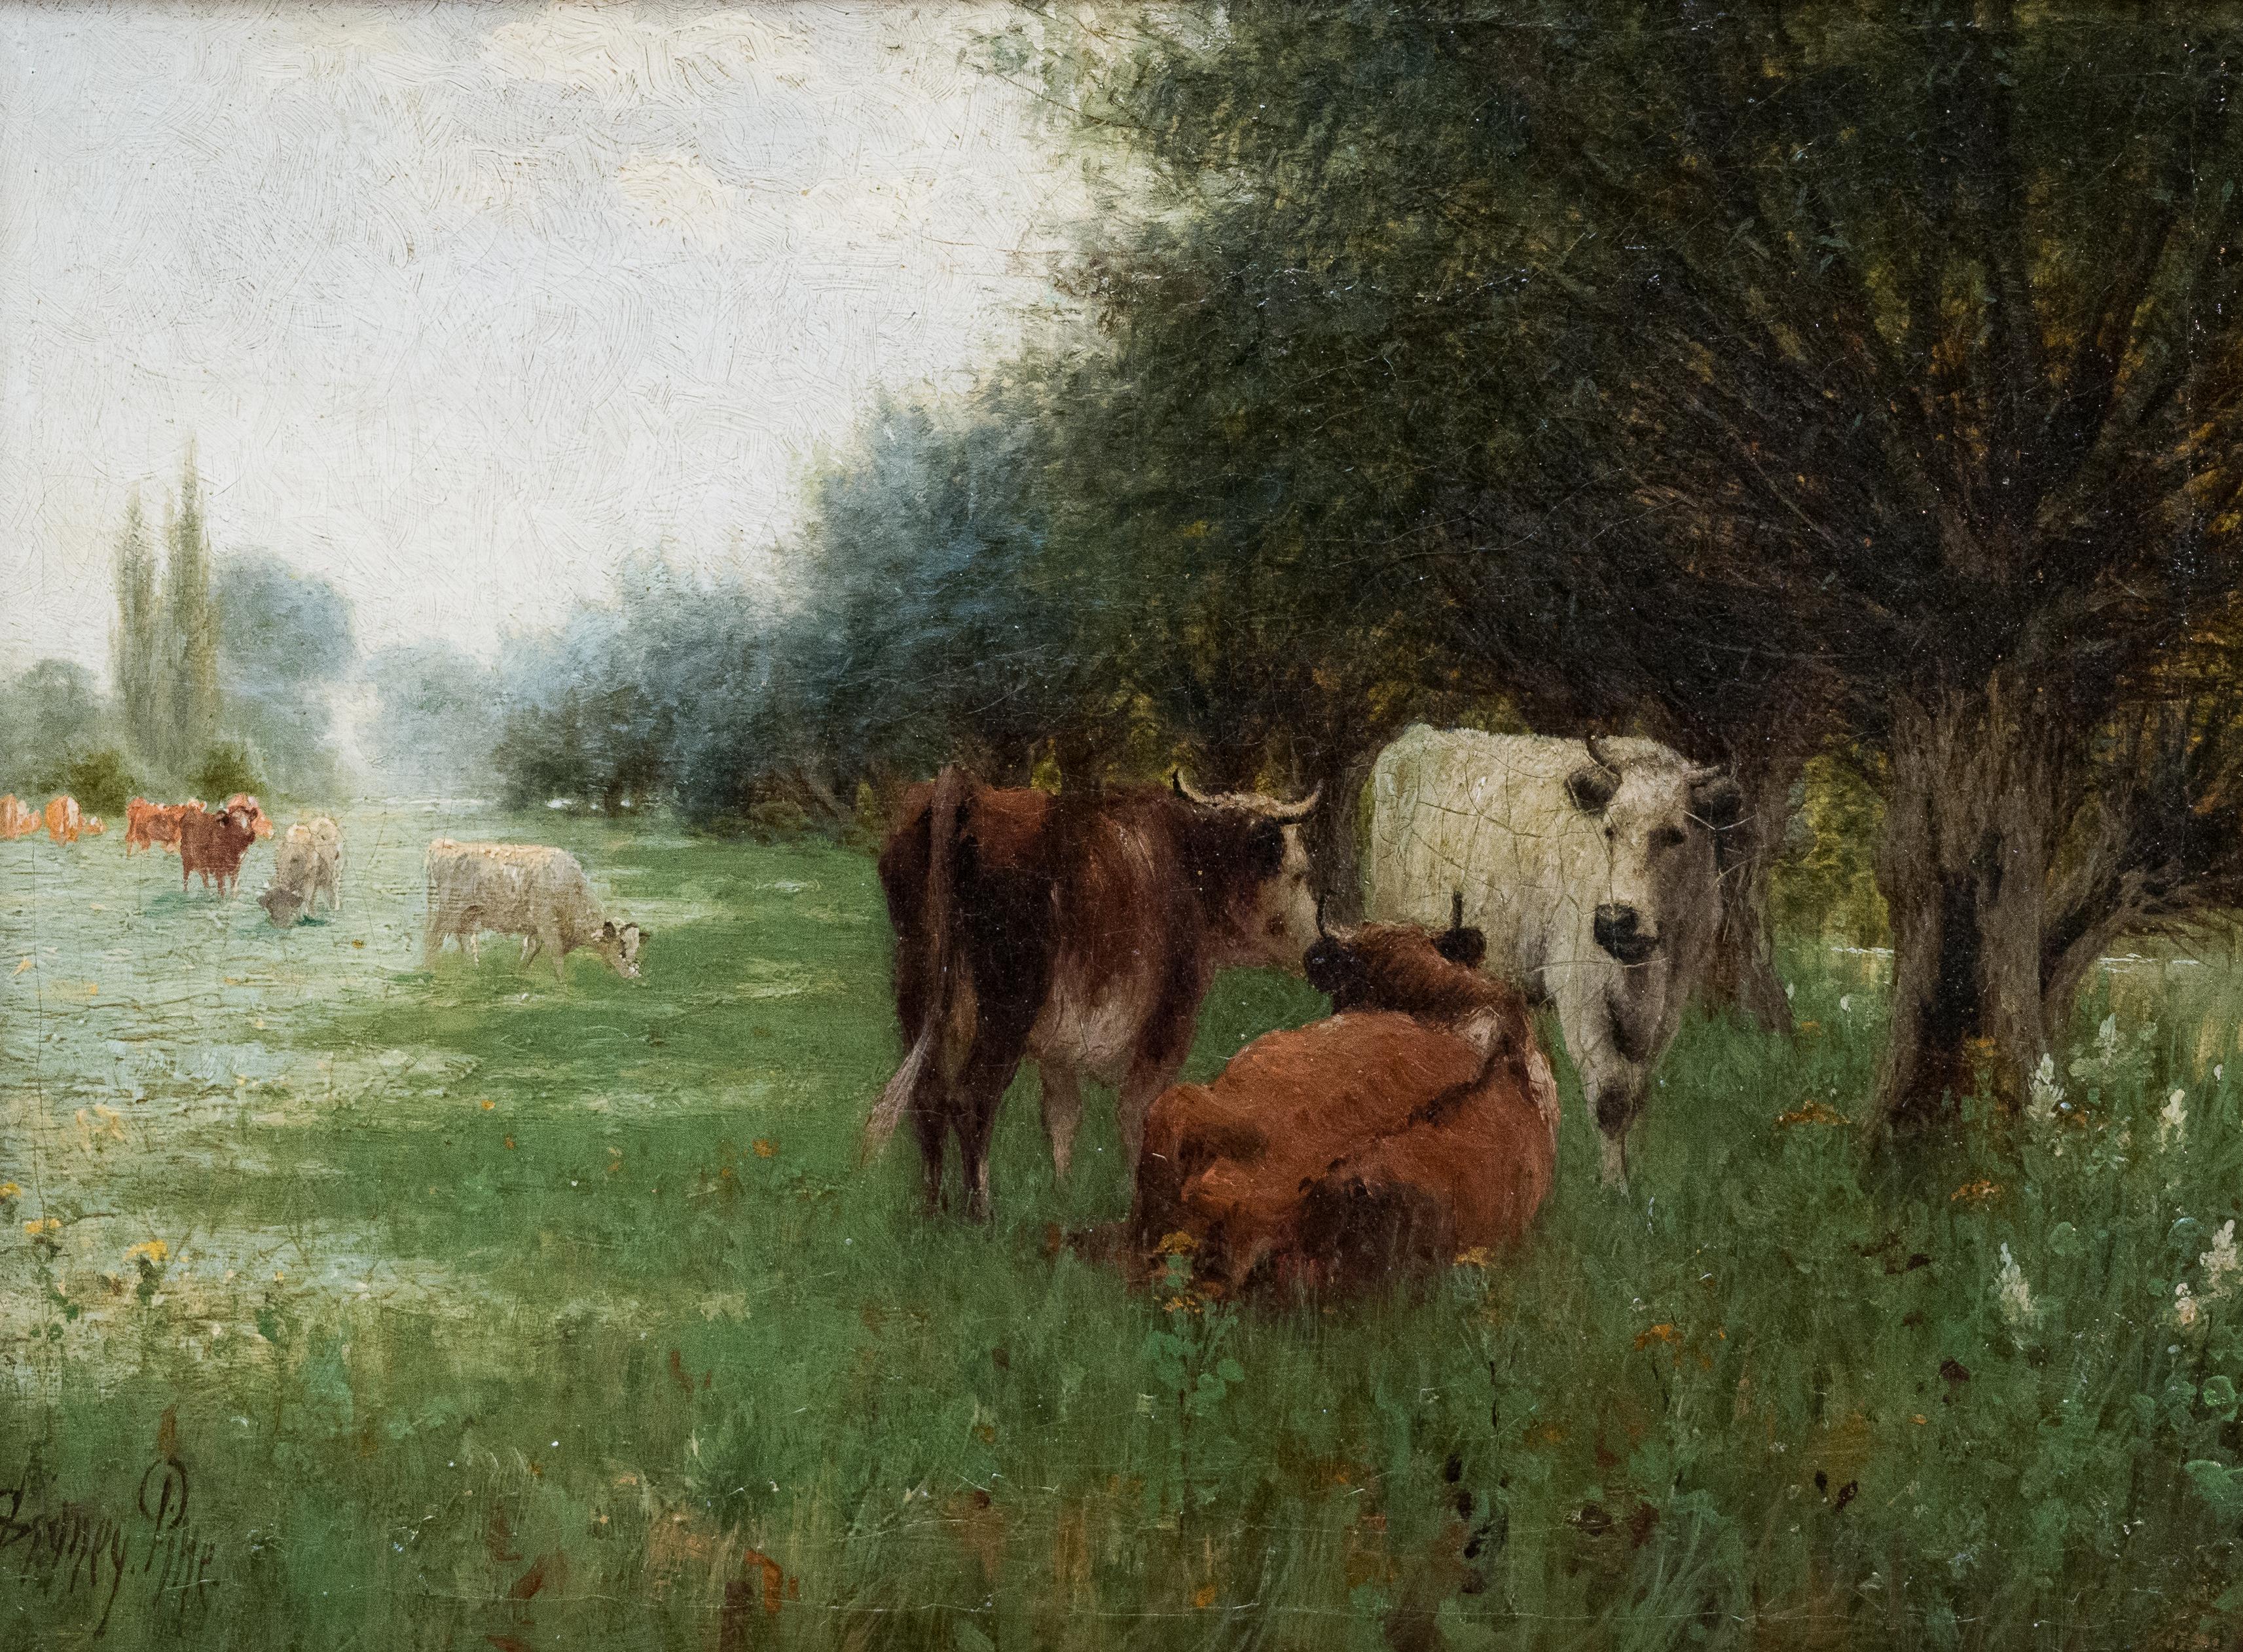 Summer Landscape With Cattle by British Artist Sidney Pike, Oil on Canvas 